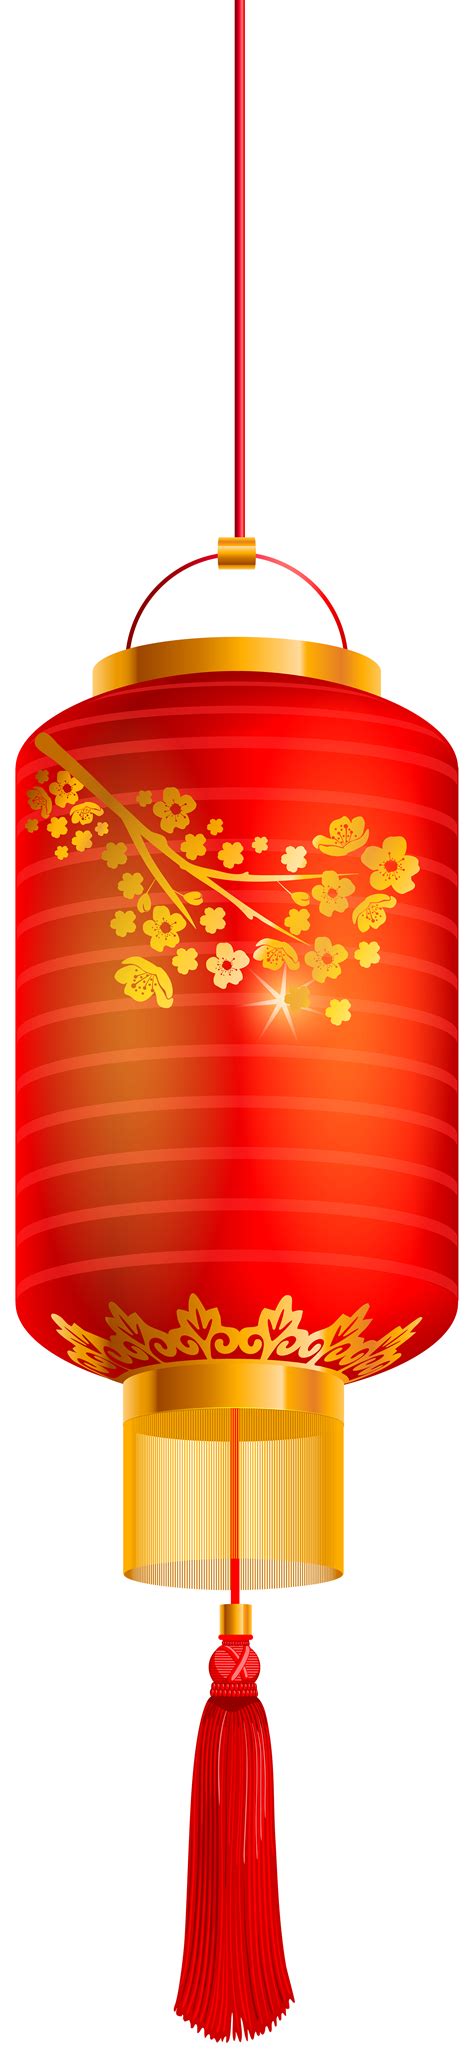 Chinese Lantern PNG Clip Art PNG Clip Art | Clip art, Chinese lanterns png image